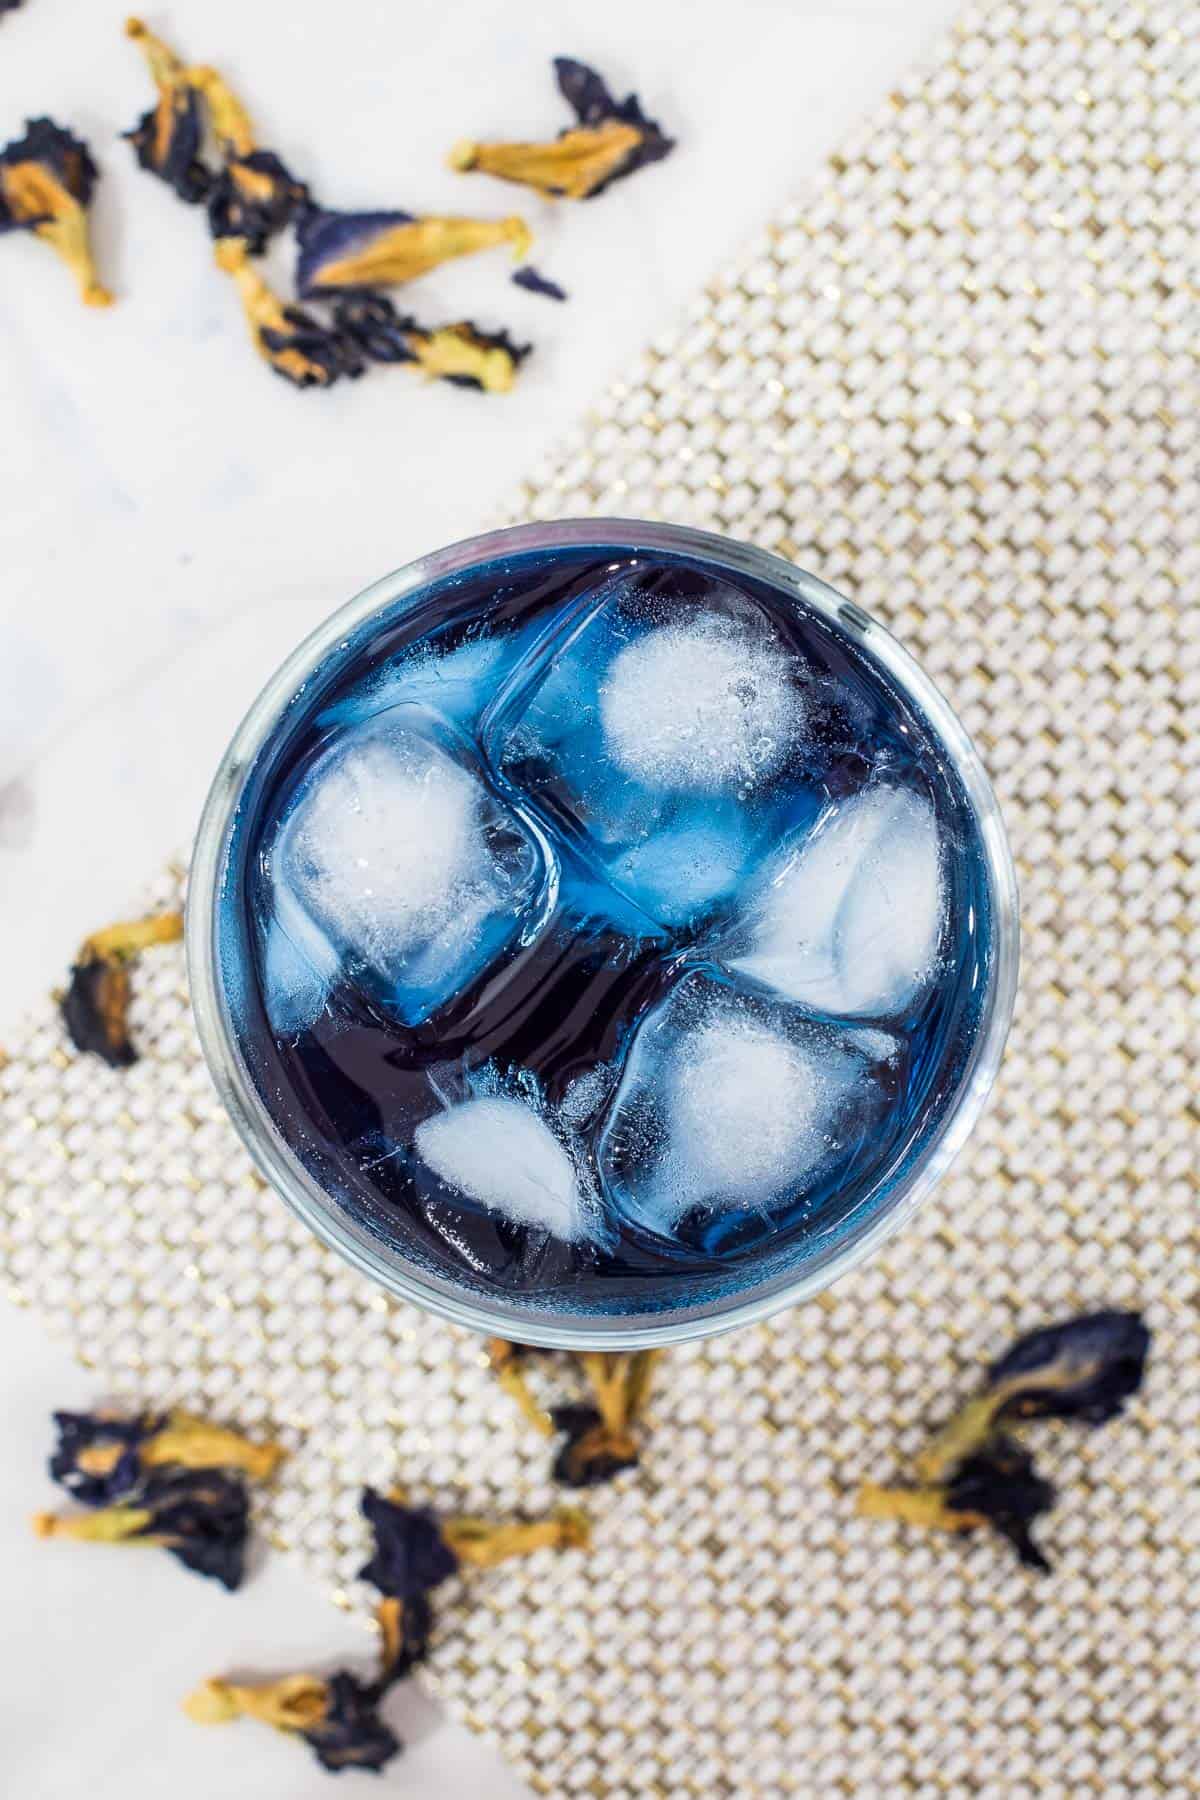 Top view of a glass of ice butterfly pea flower drink.